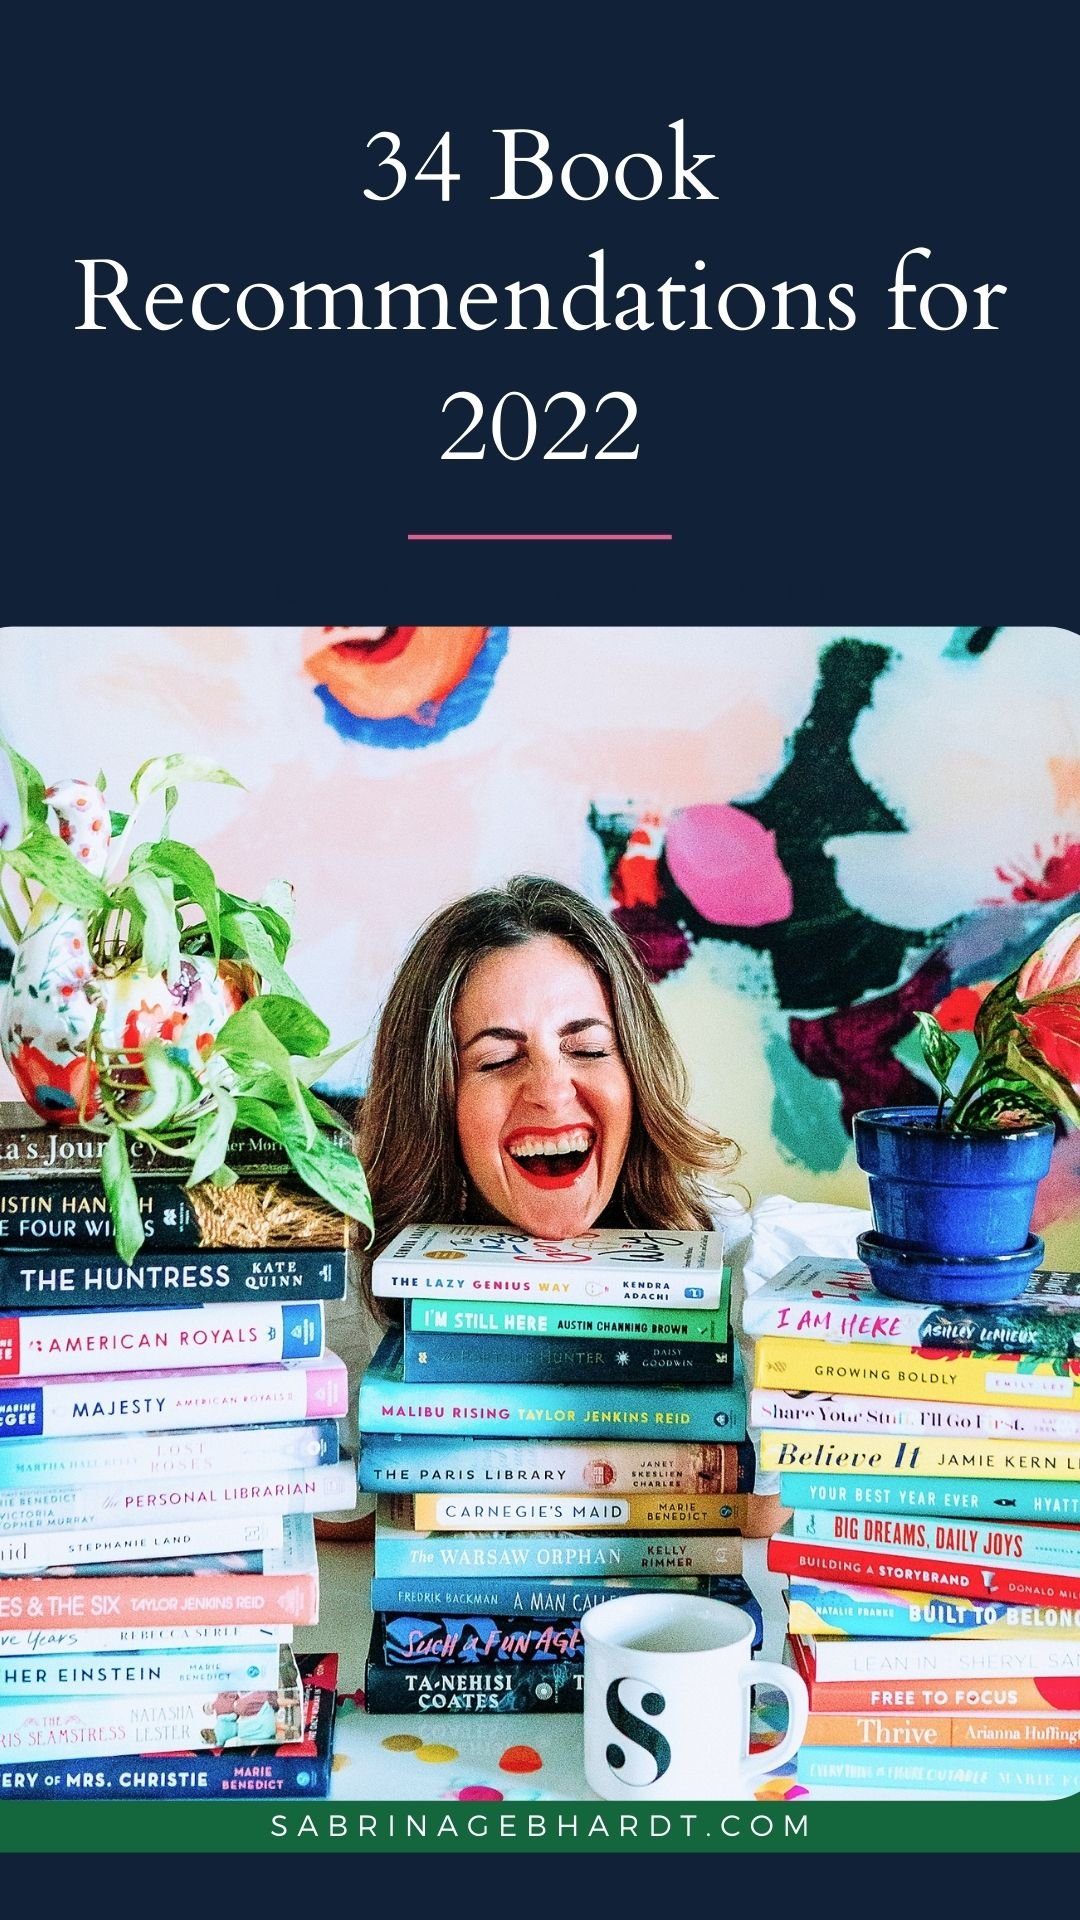 34 book recommendations for 2022 includes historical fiction and personal growth